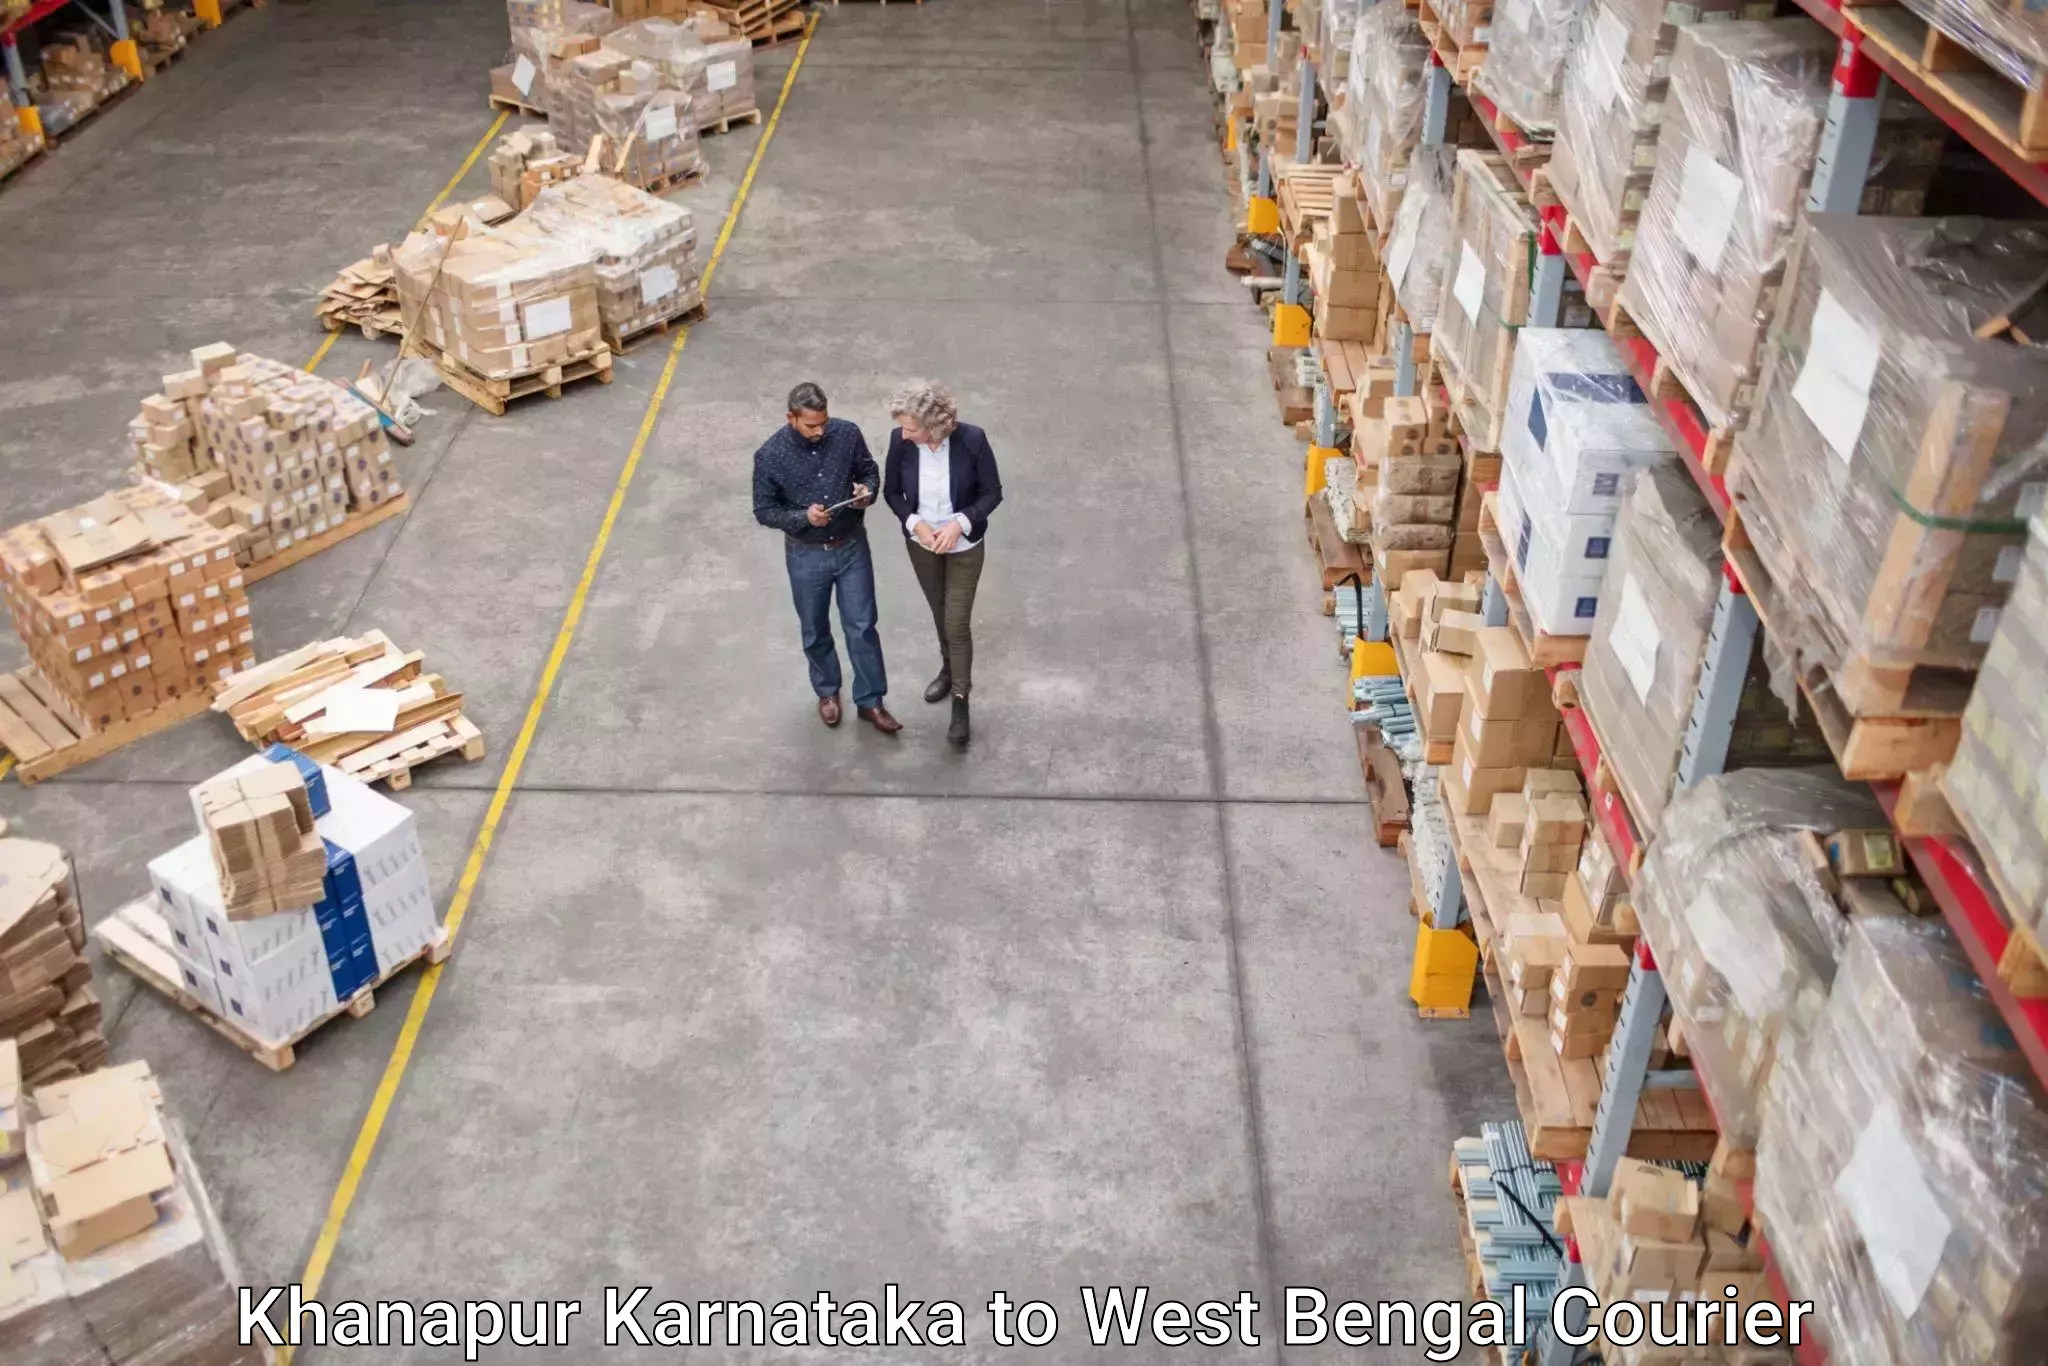 Reliable courier services Khanapur Karnataka to Cossipore